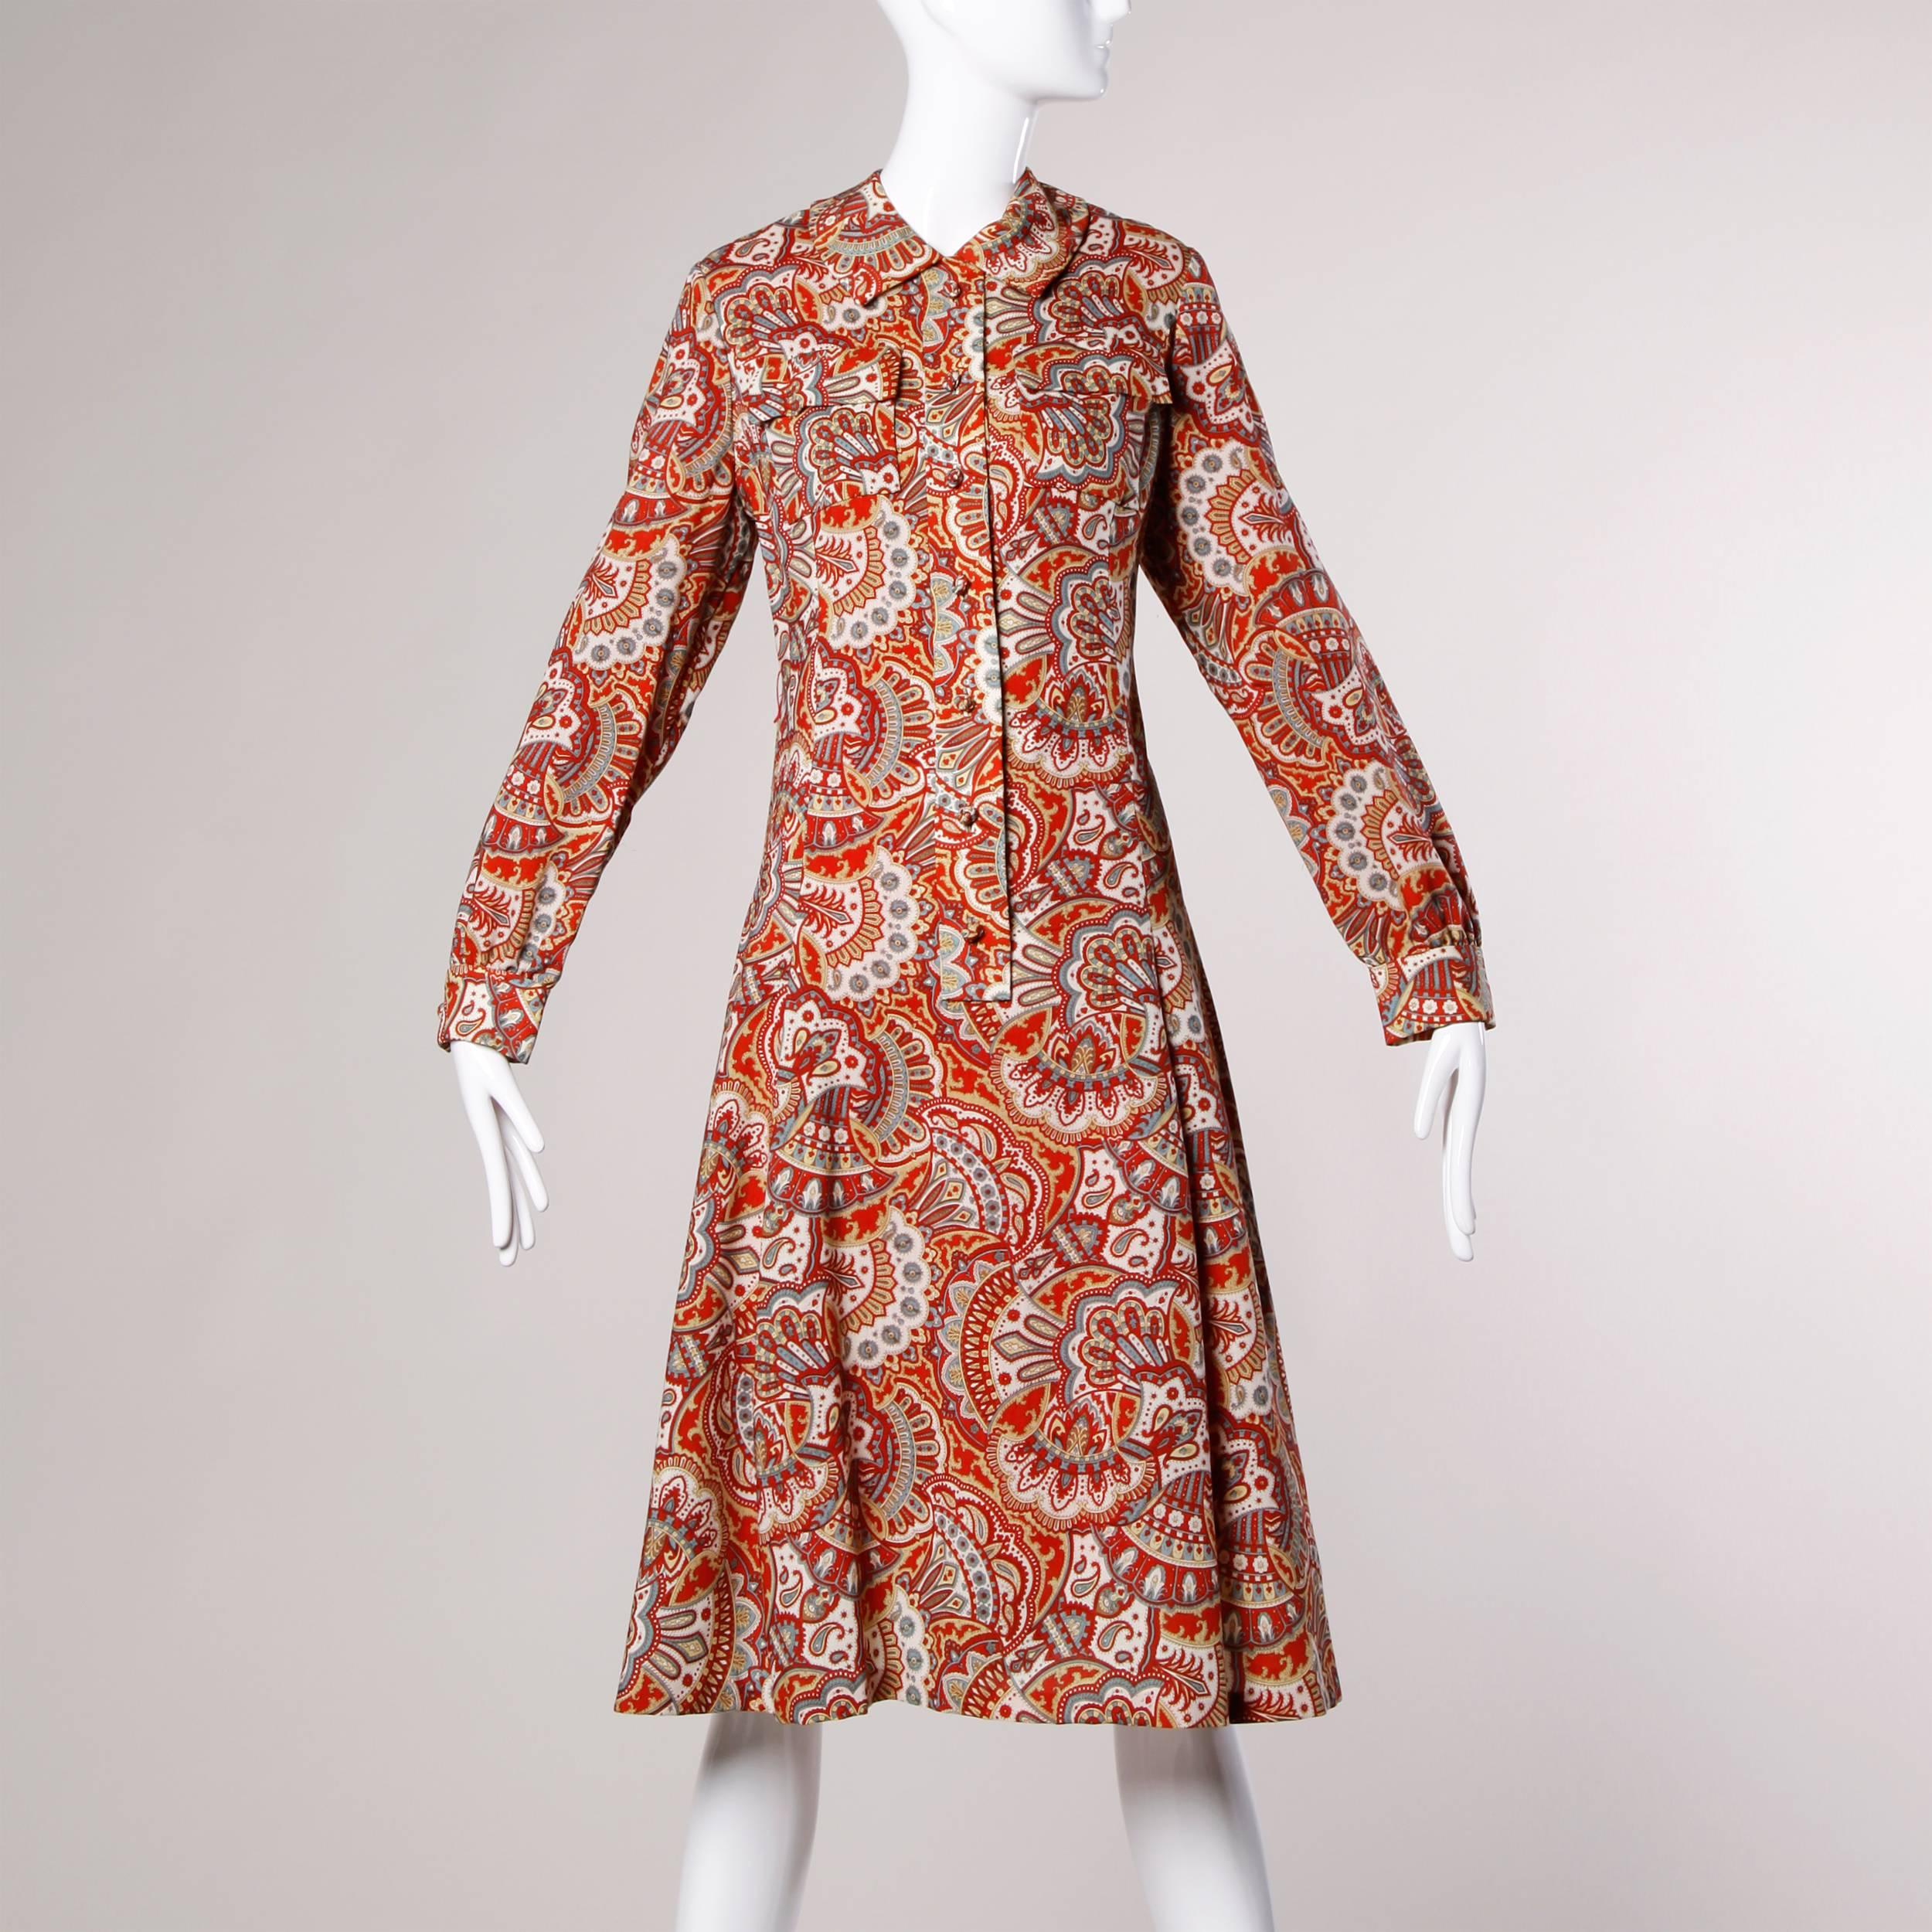 1970s Vintage Paisley Wool Coat Dress with Matching Belt 4